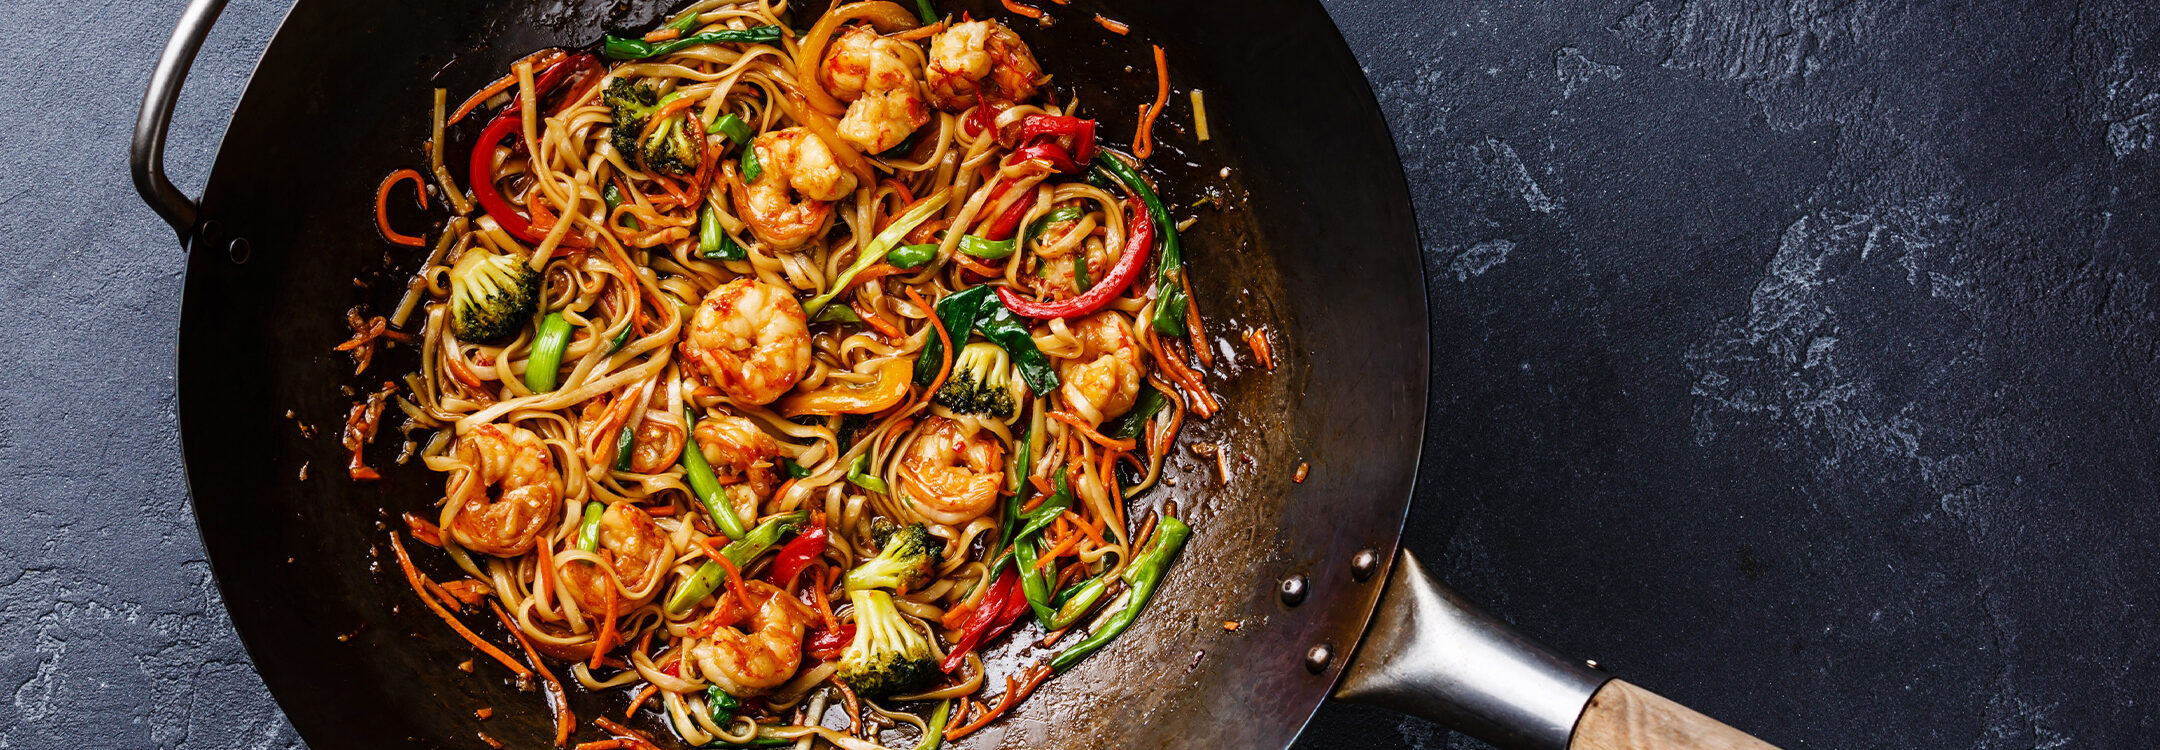 https://easyfood.ie/wp-content/uploads/2023/01/How-to-choose-the-best-wok-Kitchen-Tips-Banner-2160x750.jpg